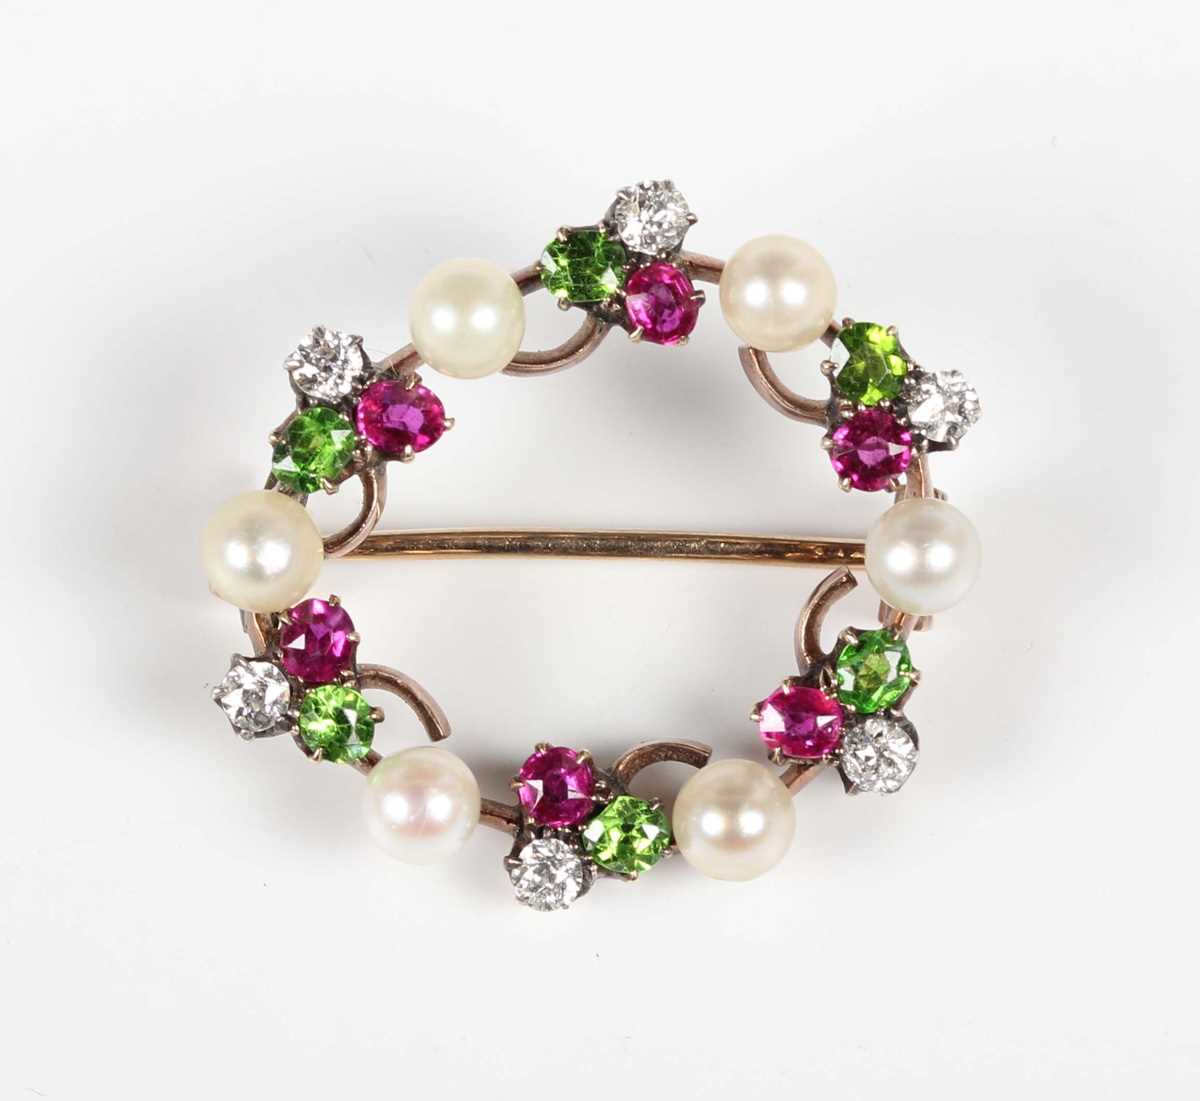 A gold backed, diamond, ruby, demantoid garnet and pearl brooch, designed as a wreath with trefoil